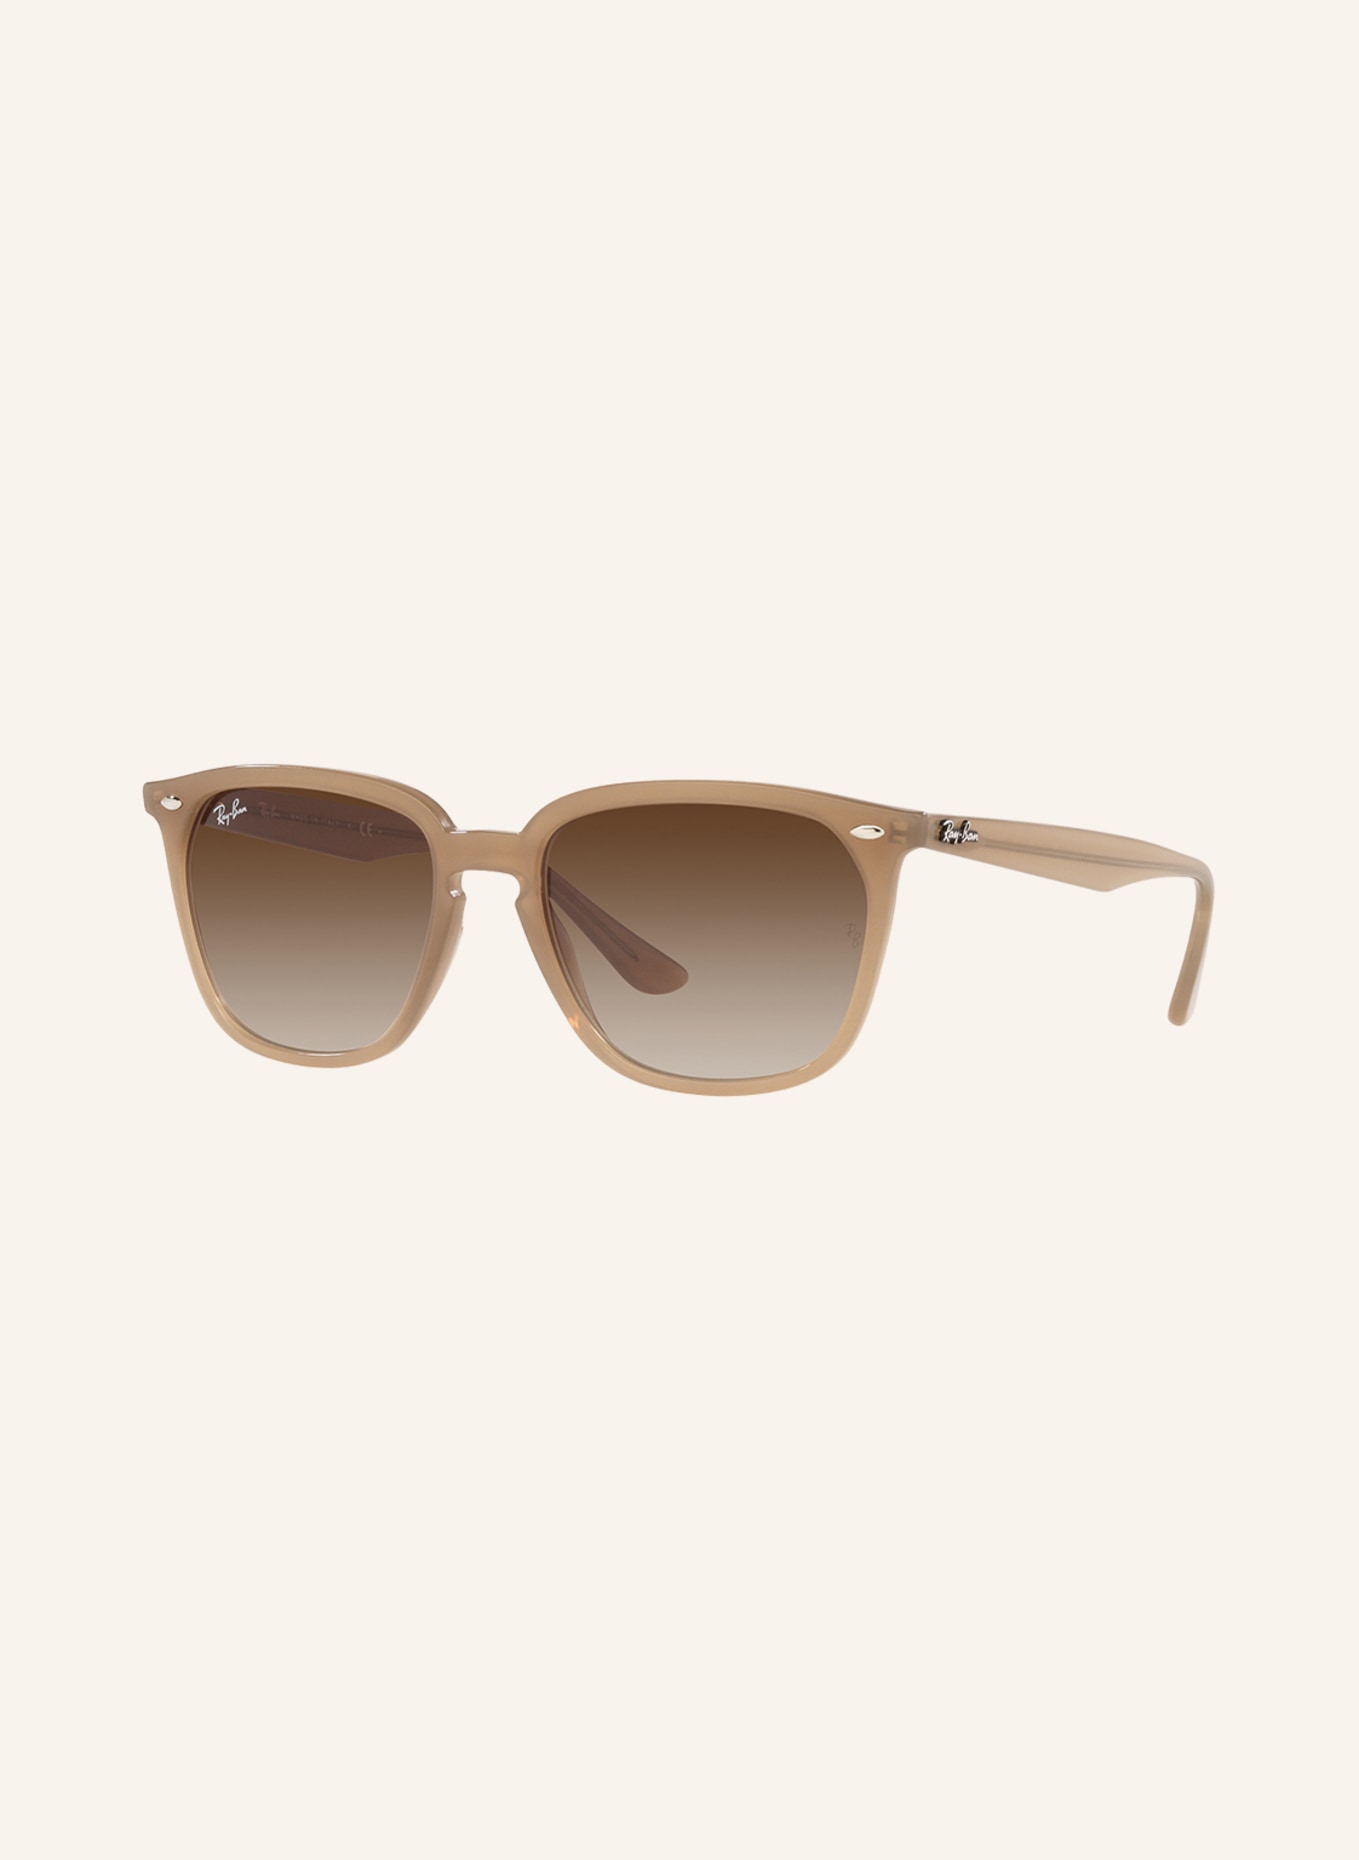 Ray-Ban Sunglasses RB4362, Color: 616613 - LIGHT BROWN/ BROWN GRADIENT (Image 1)